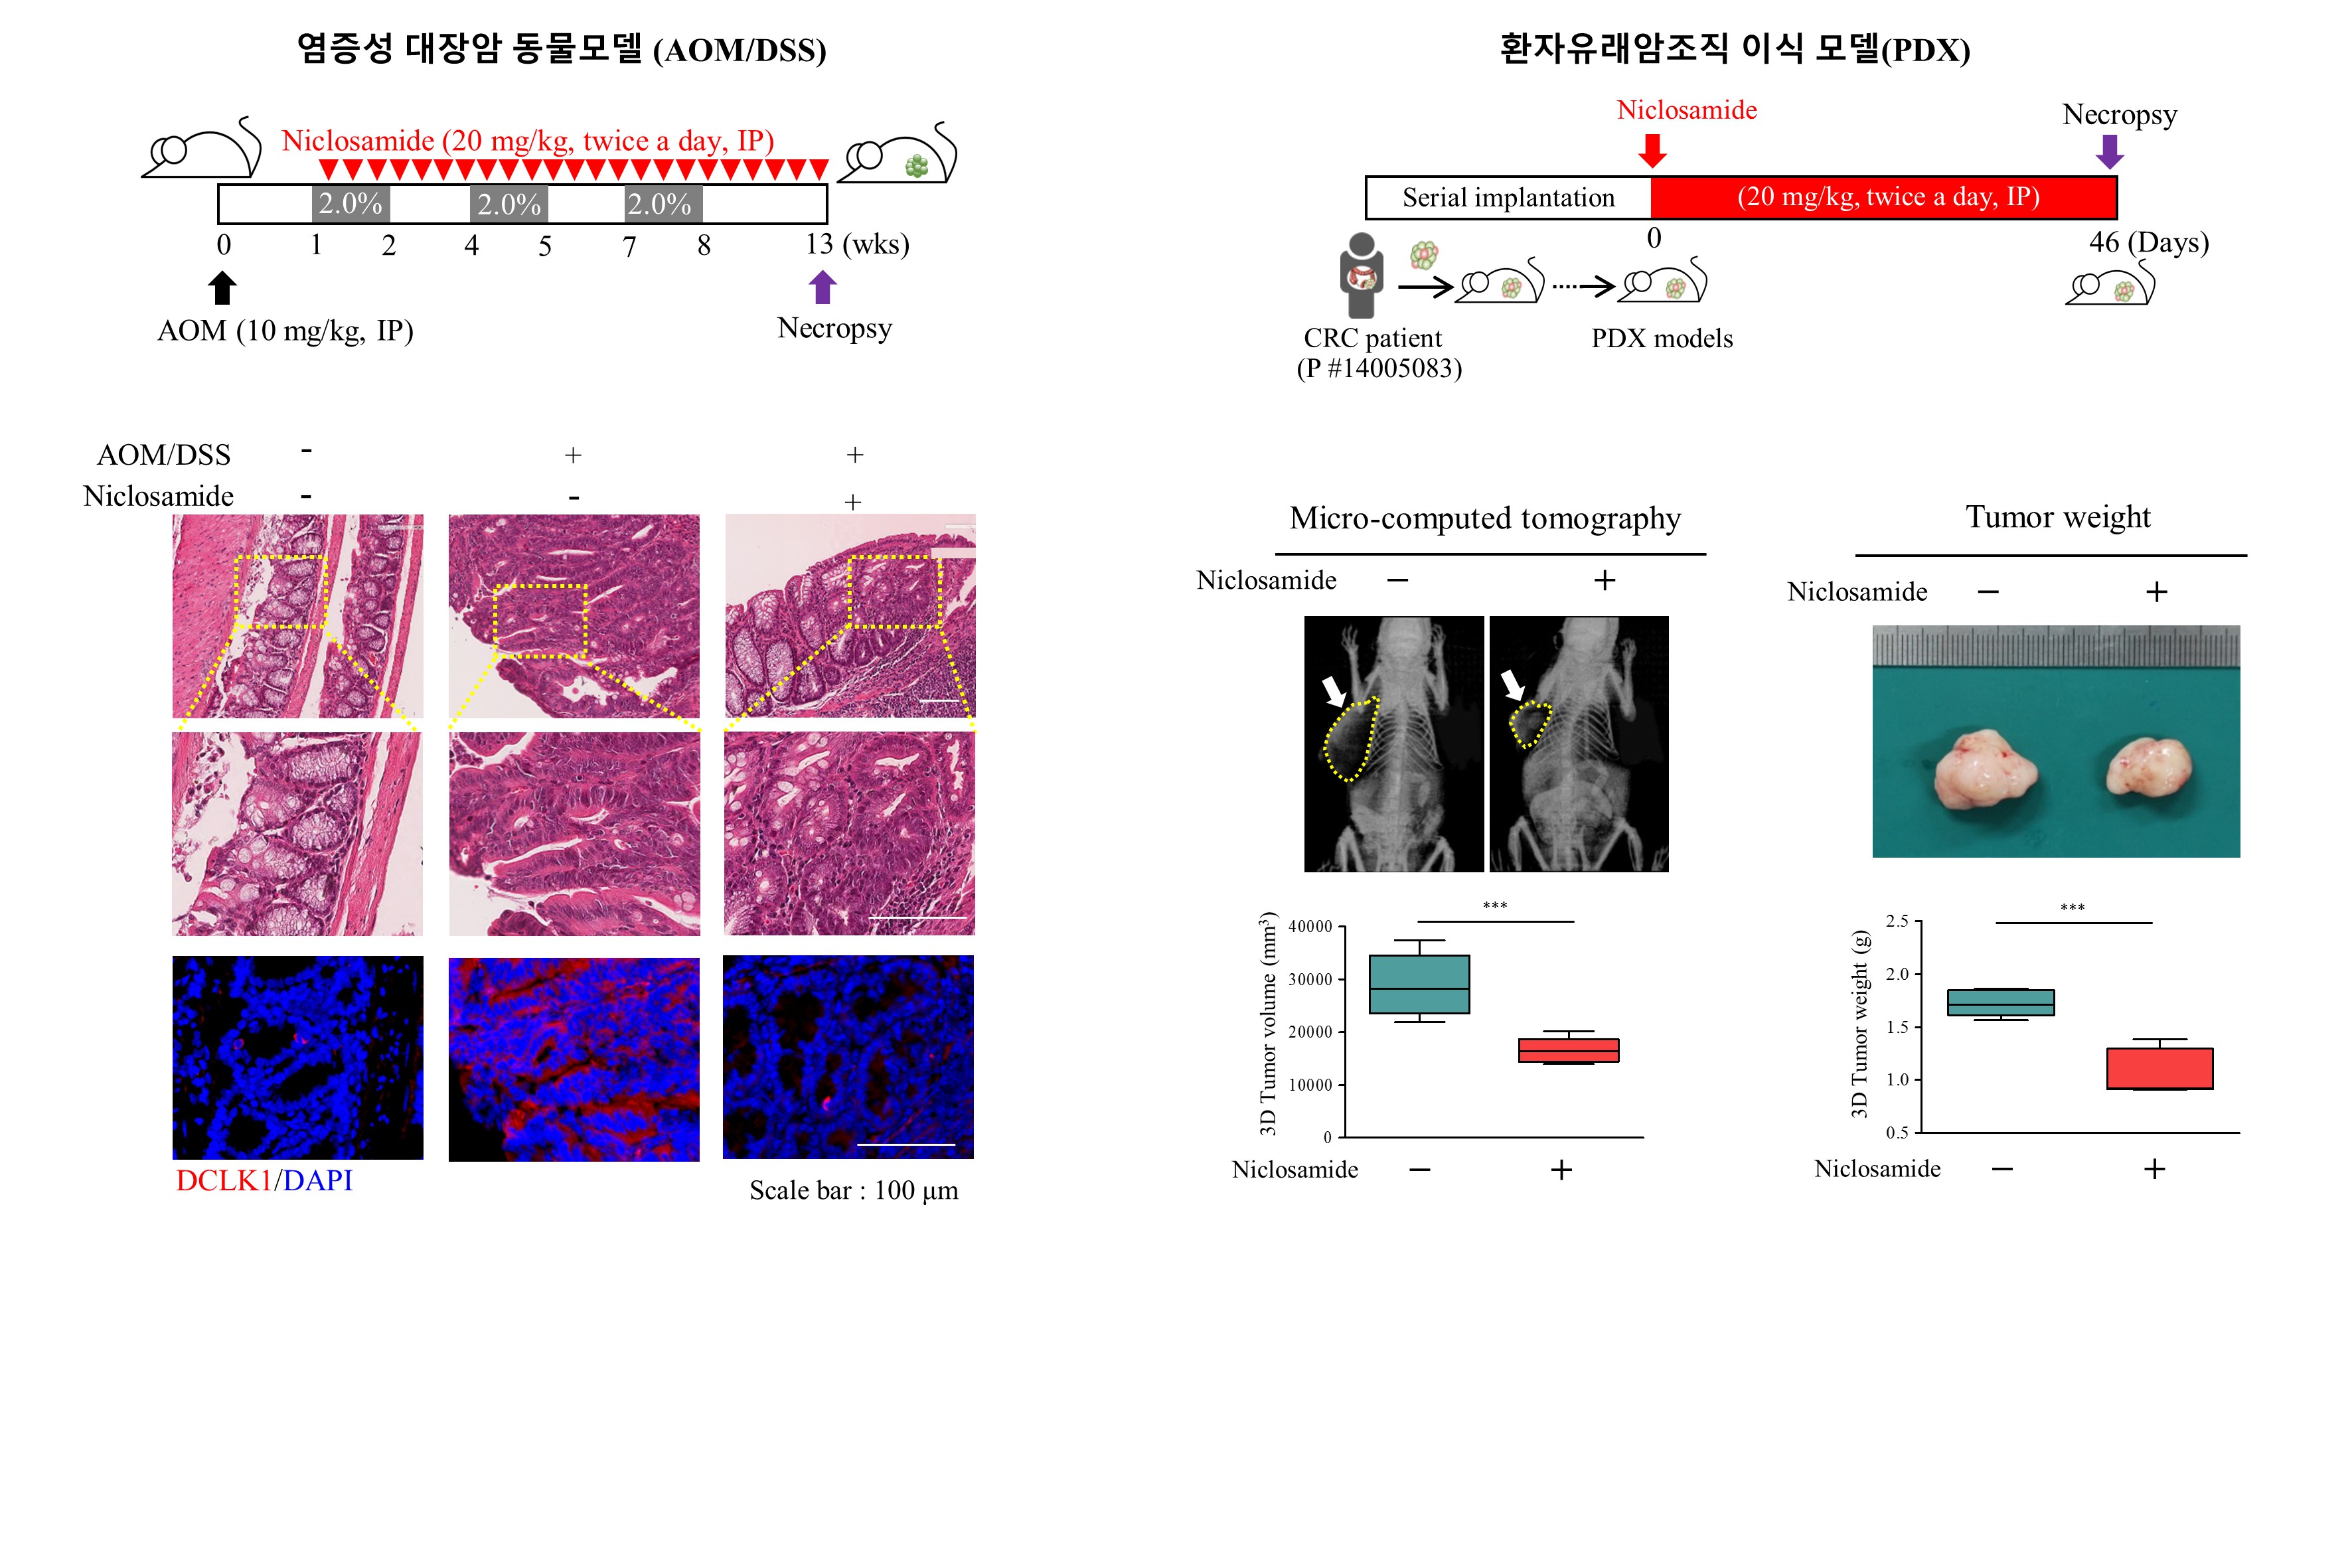 Professor Jeong-Seok Nam's research team creates cost-effective chemotherapy to target cancer stem cell through development of new drugs 이미지